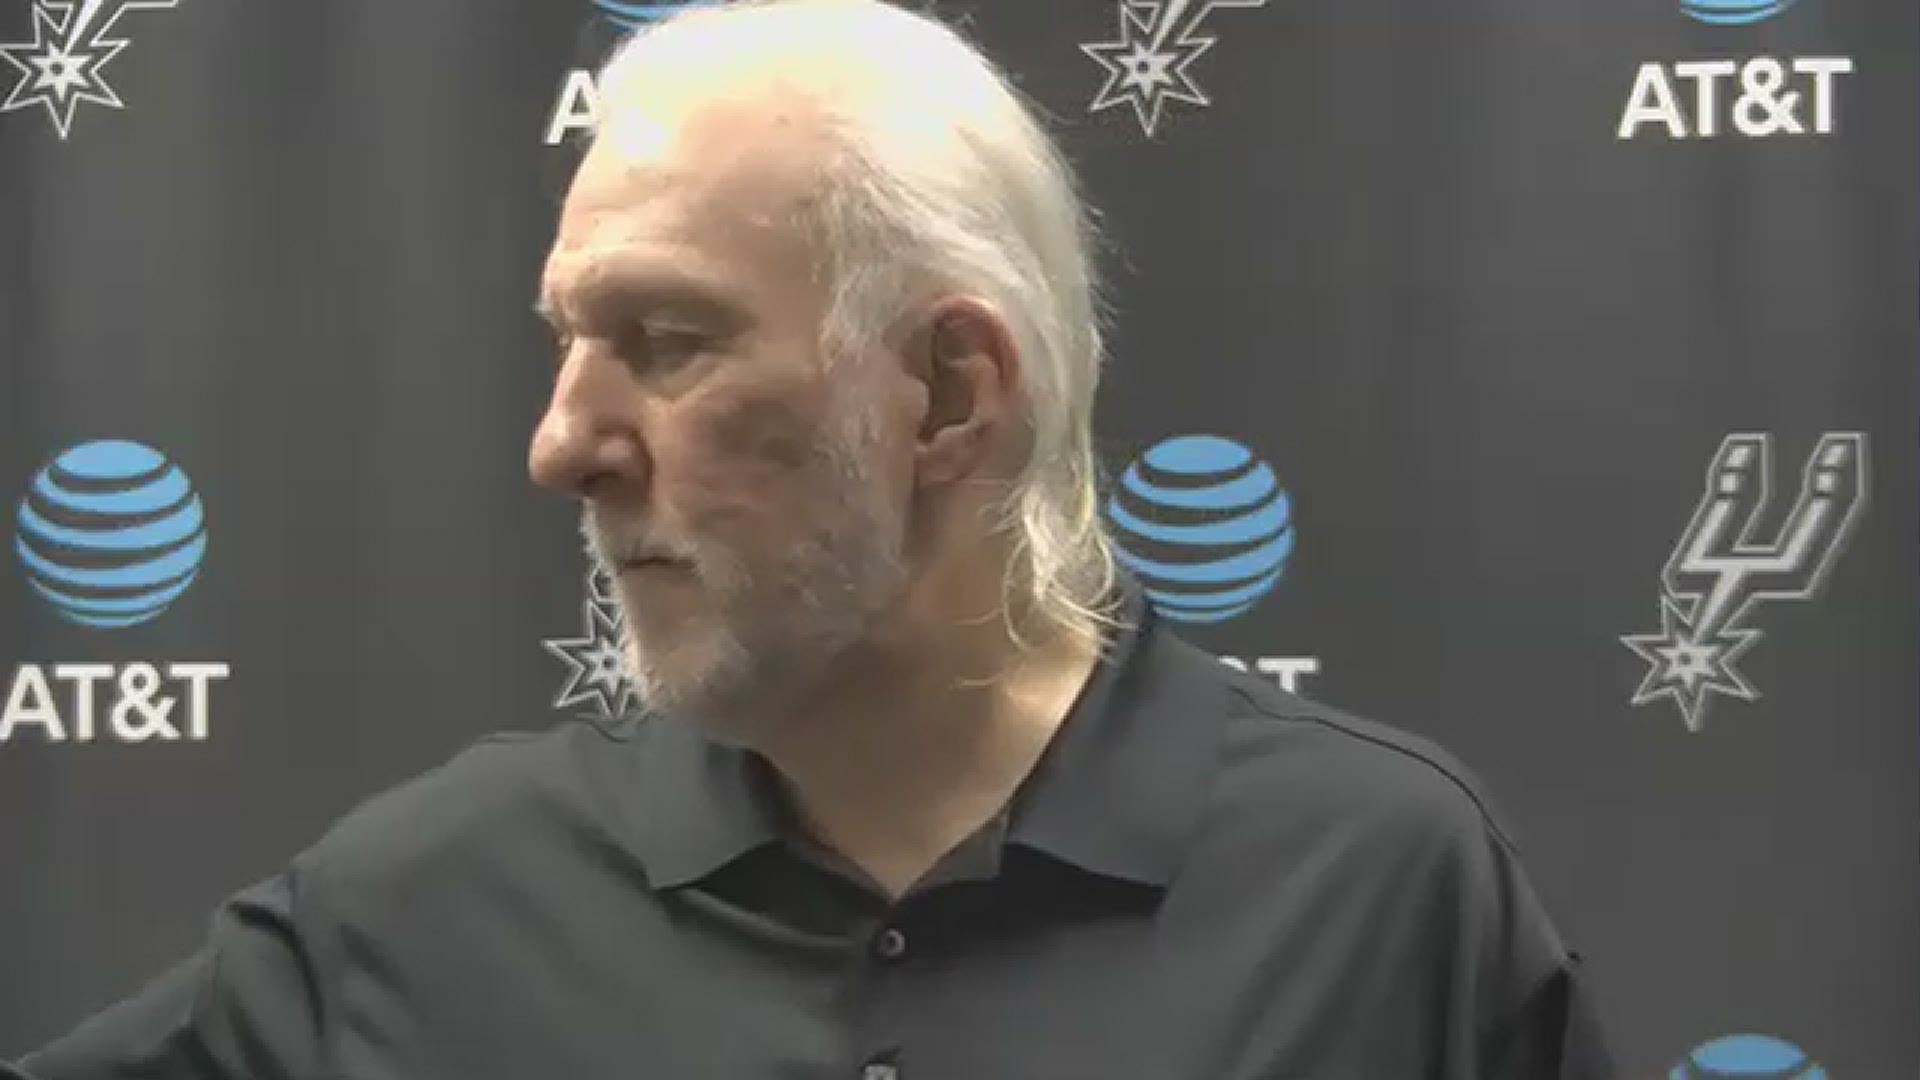 Pop talked about the opportunities his young guys have had, Prop B failing in San Antonio, and Danny Green's growth.